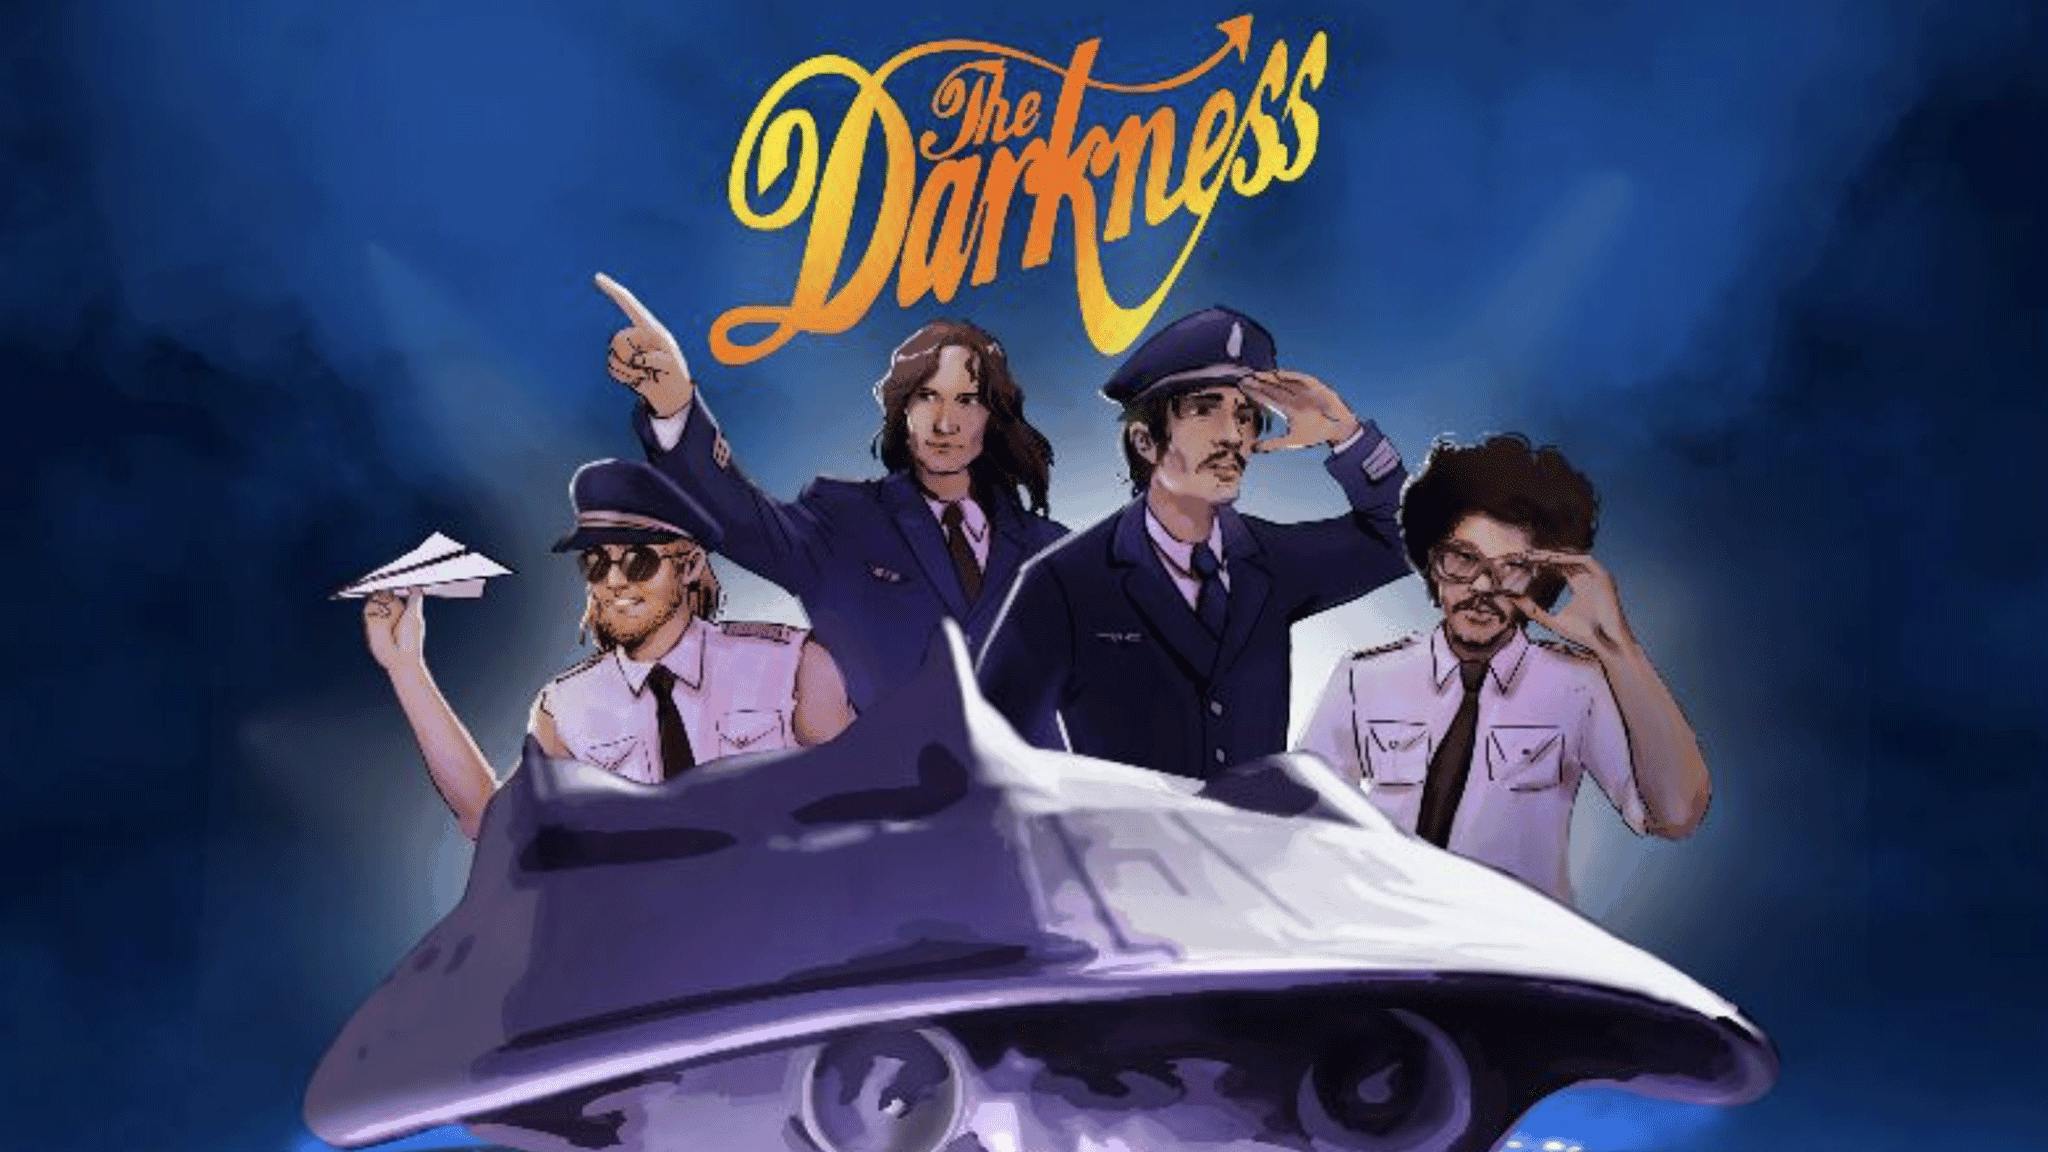 The Darkness announce 20th anniversary Permission To Land tour